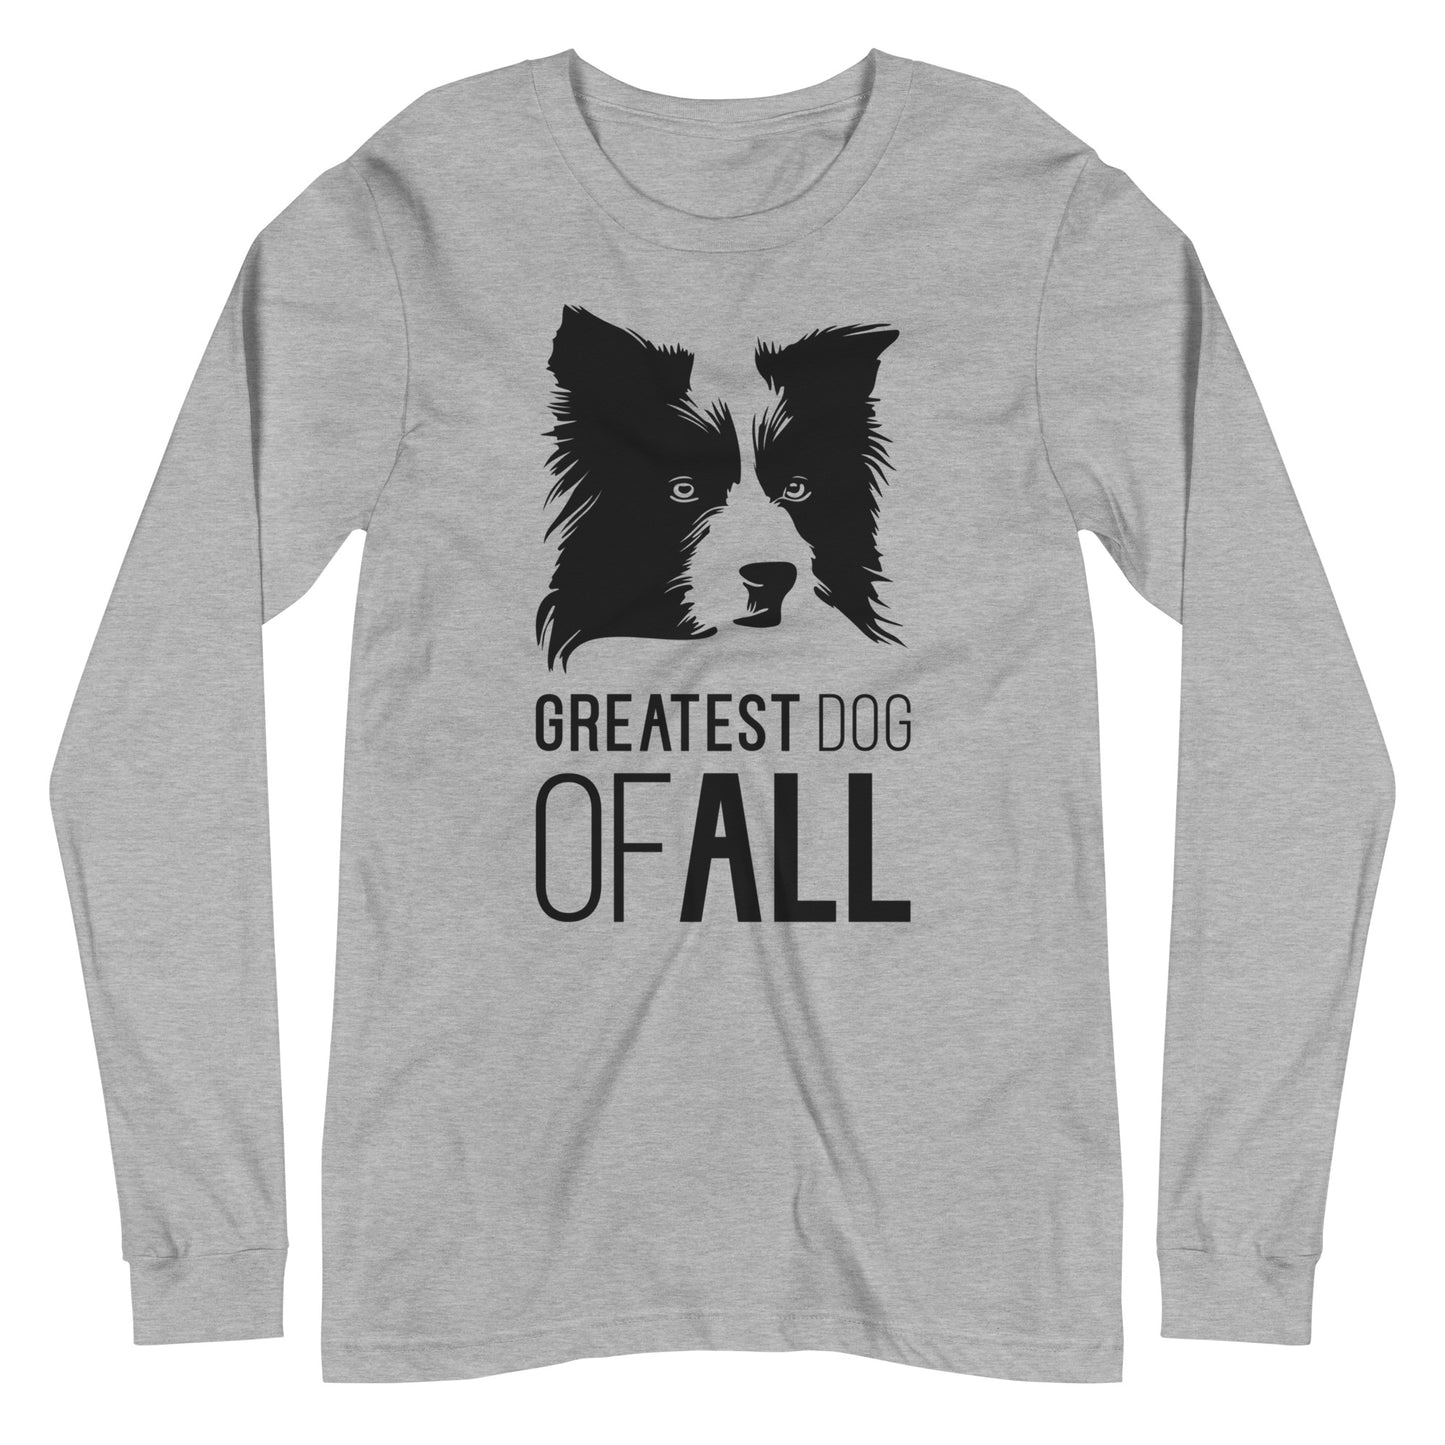 Black Border Collie face silhouette with Greatest Dog of All caption on unisex athletic heather long sleeve t-shirt